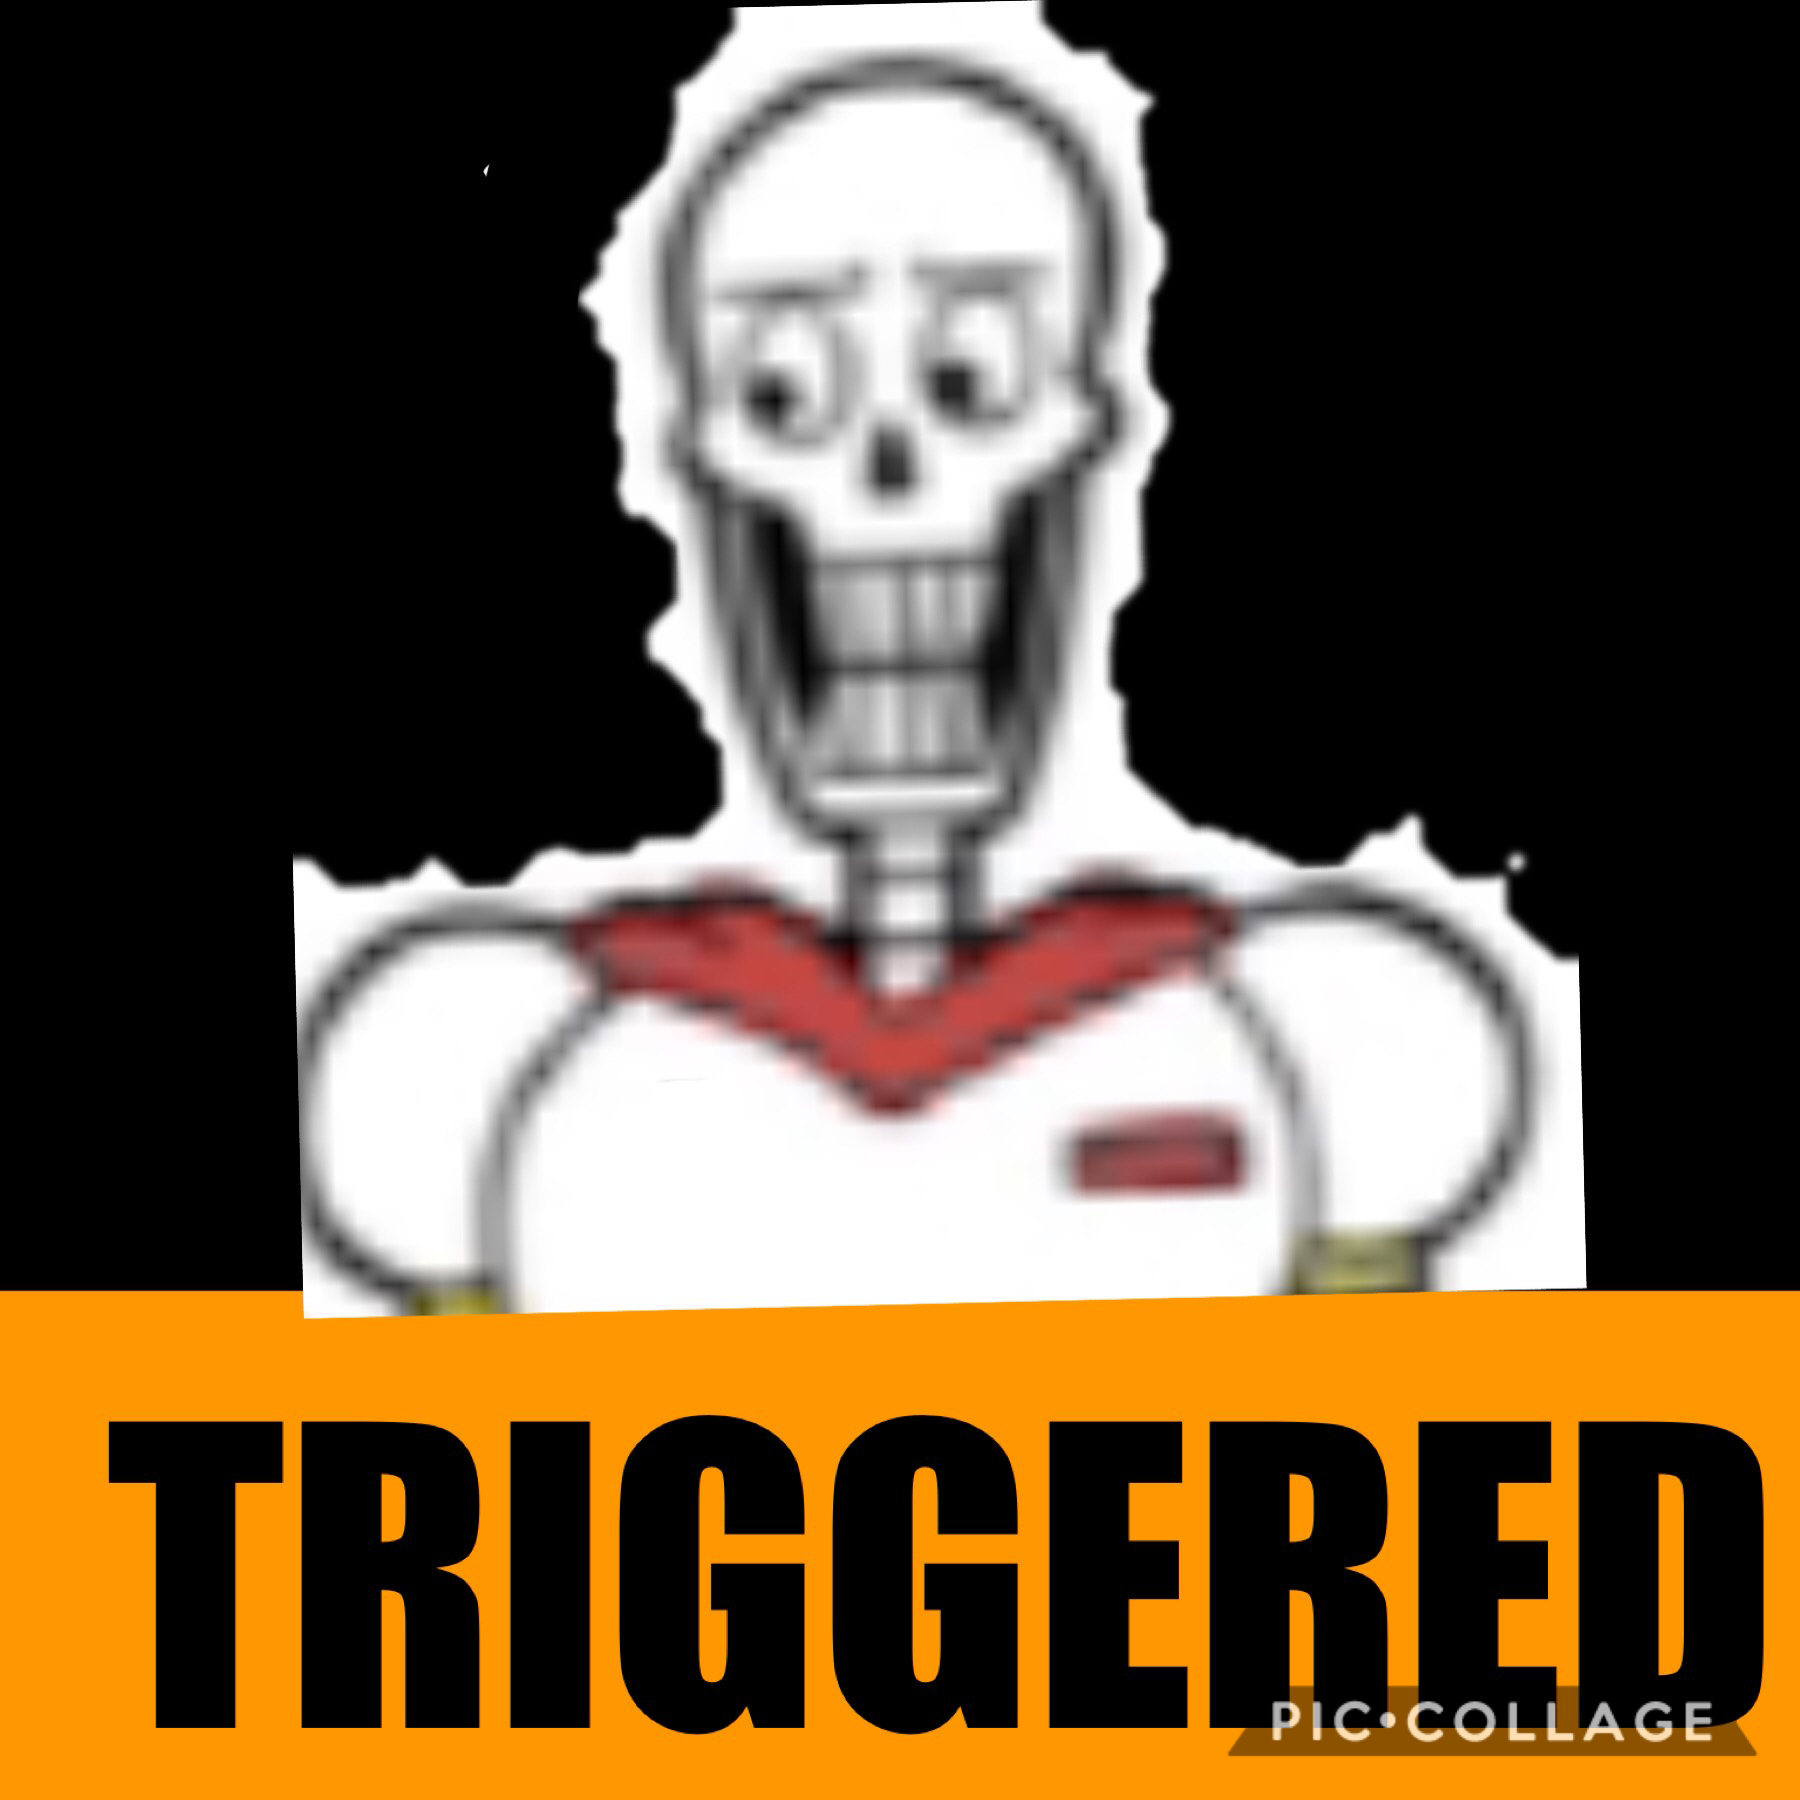 Papyrus is TRIGGERED 